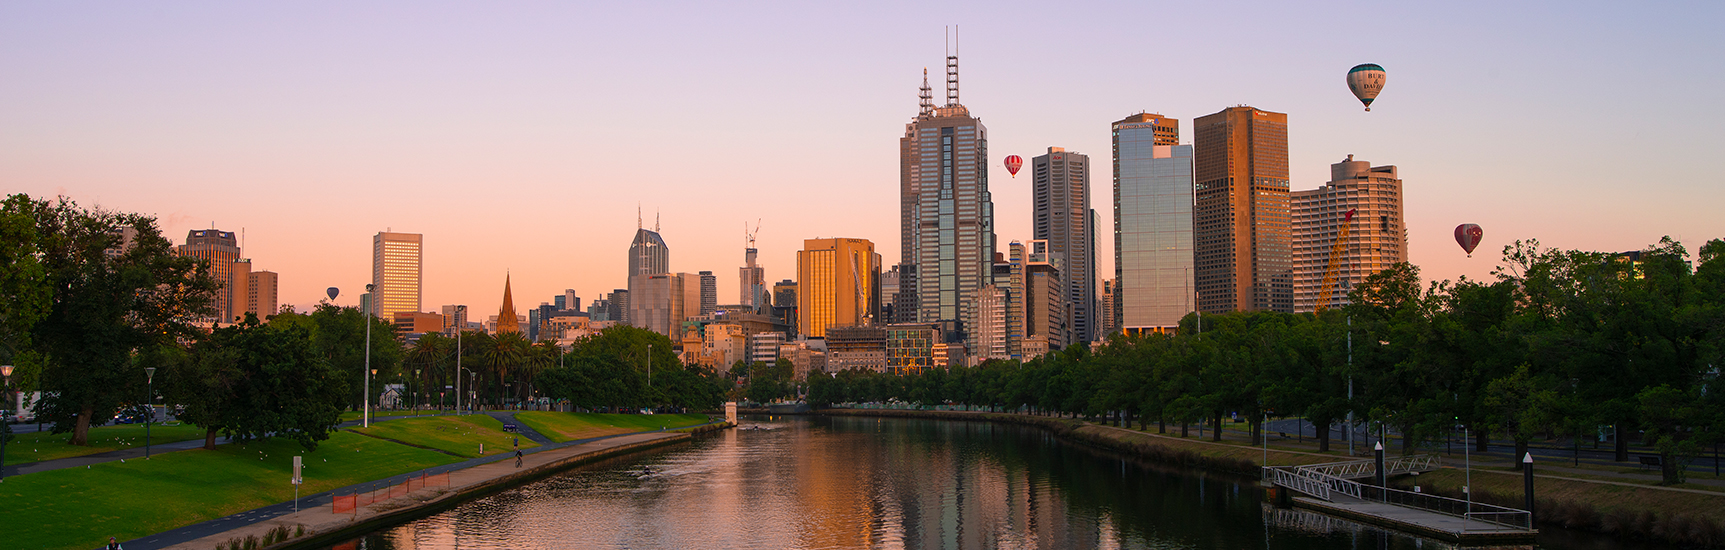 Melbourne skyline with hot air balloons